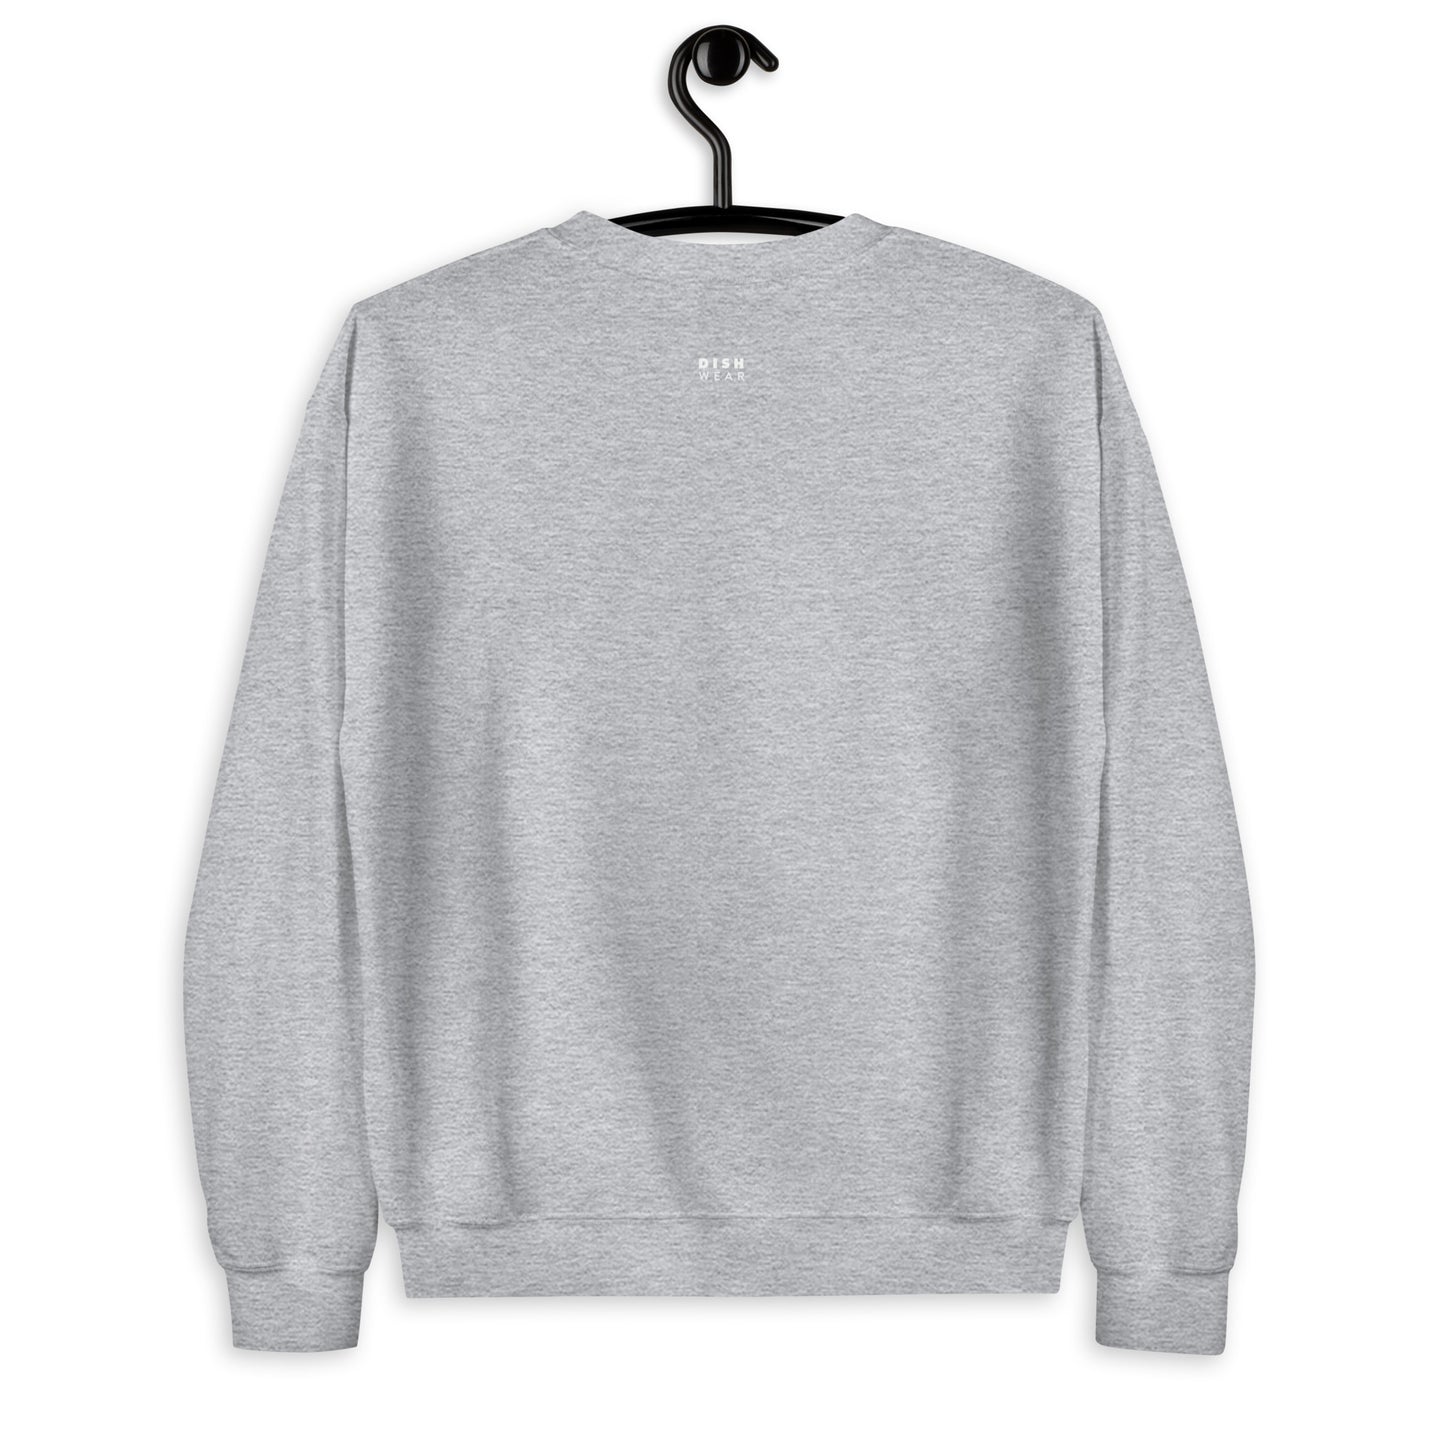 Queso Sweatshirt - Arched Font